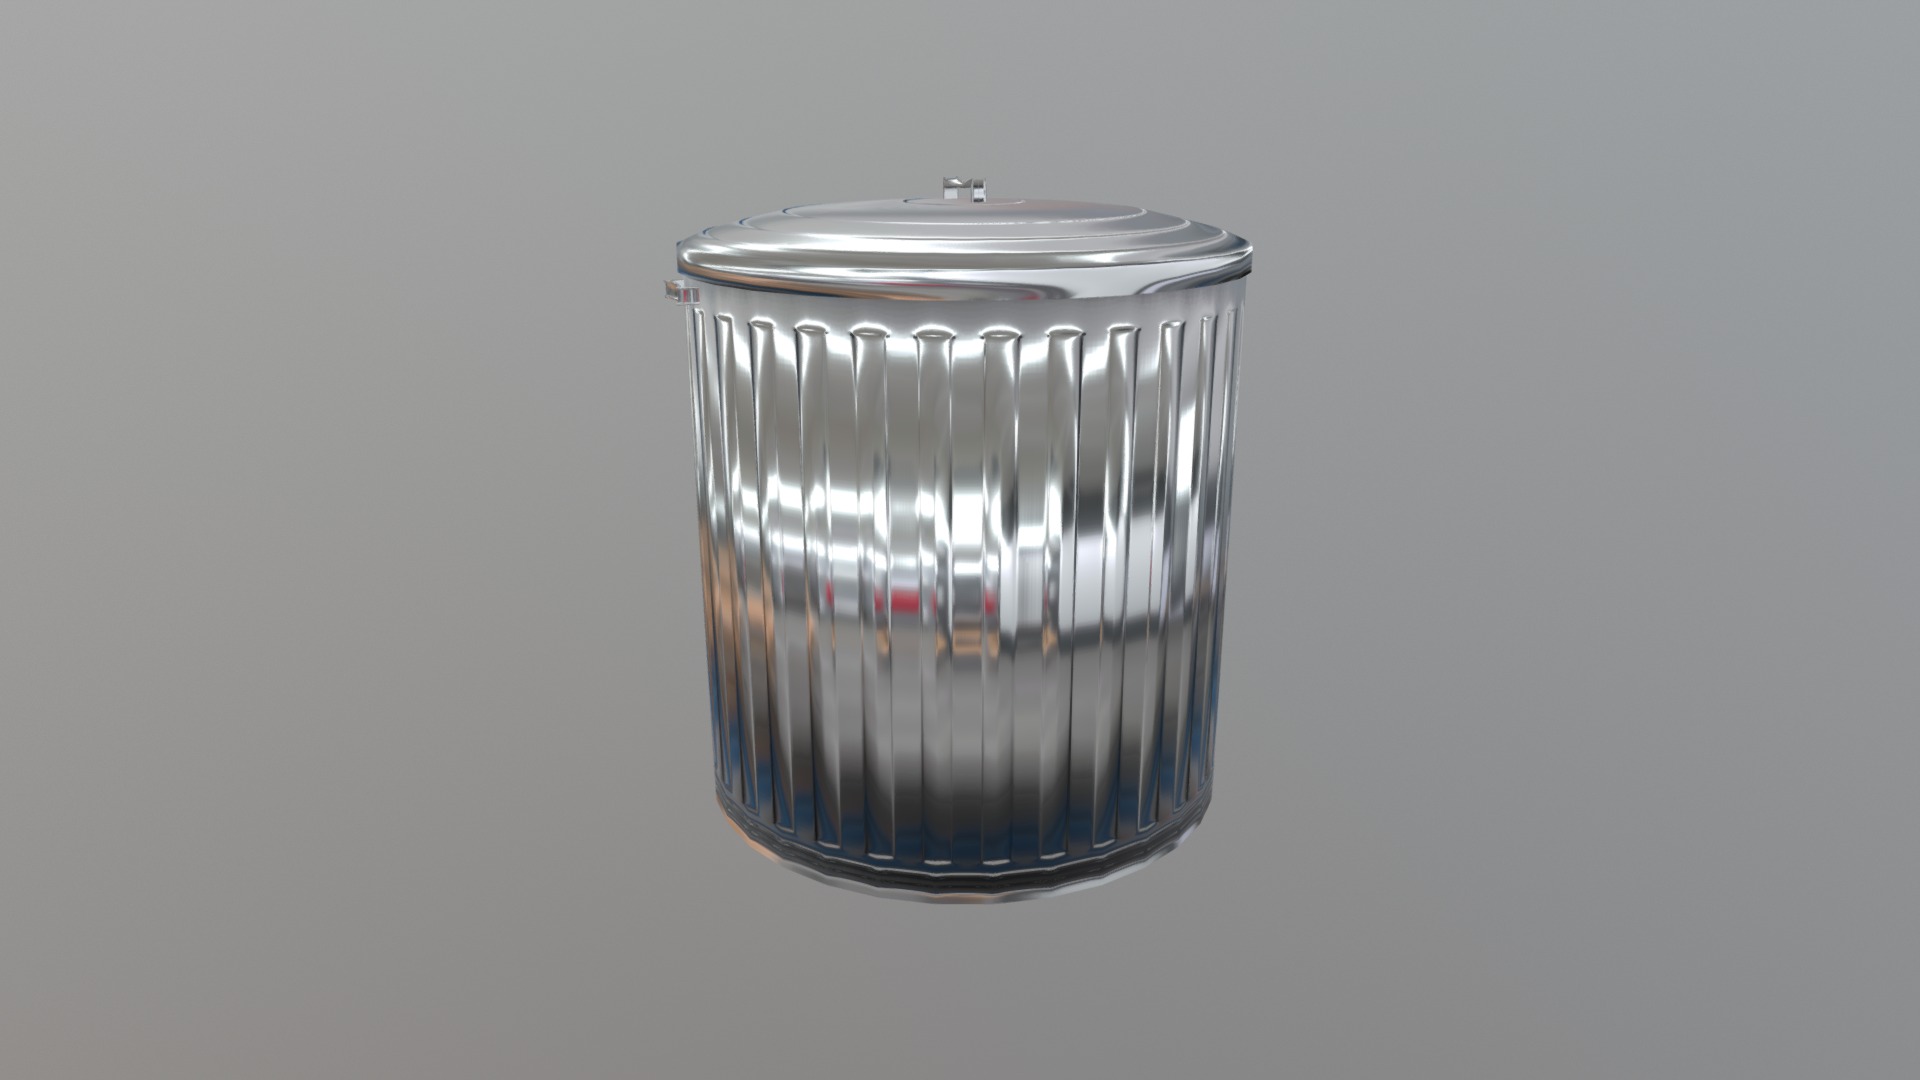 3D model Metal Trash Can - This is a 3D model of the Metal Trash Can. The 3D model is about a glass jar with a clear top.